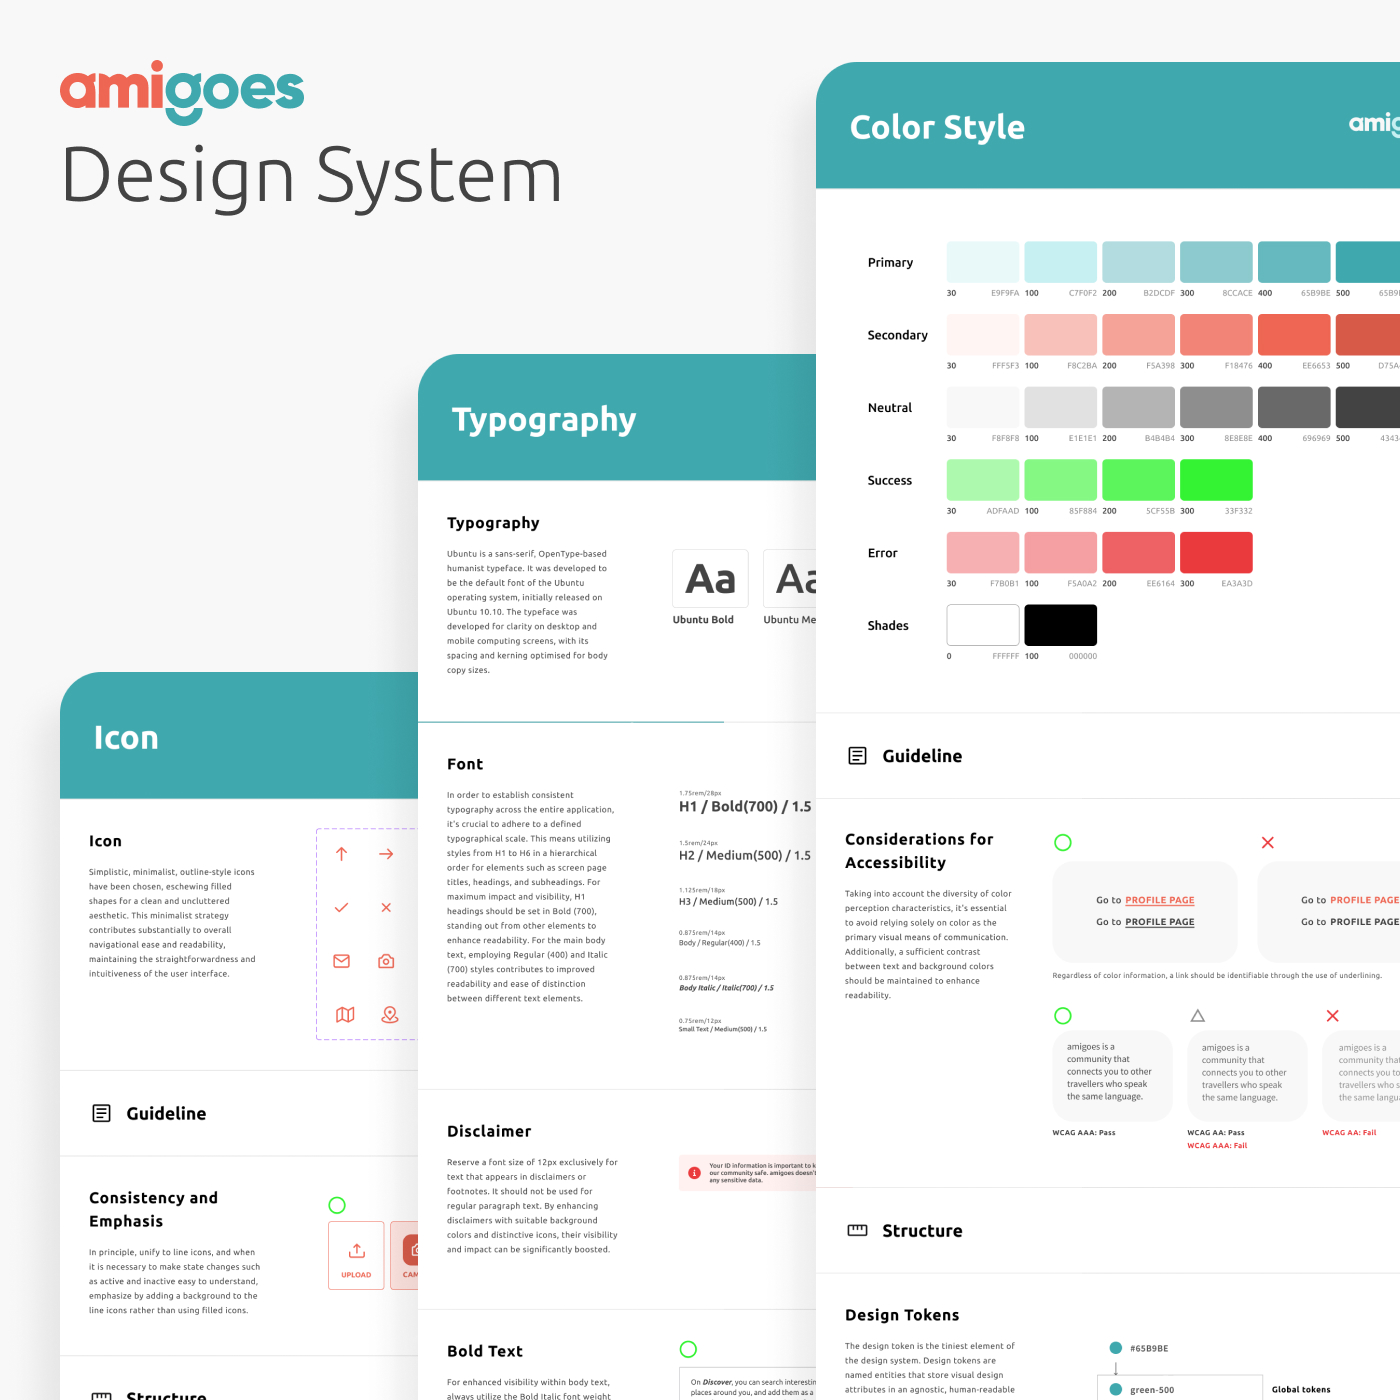 amigoes-design-system-top